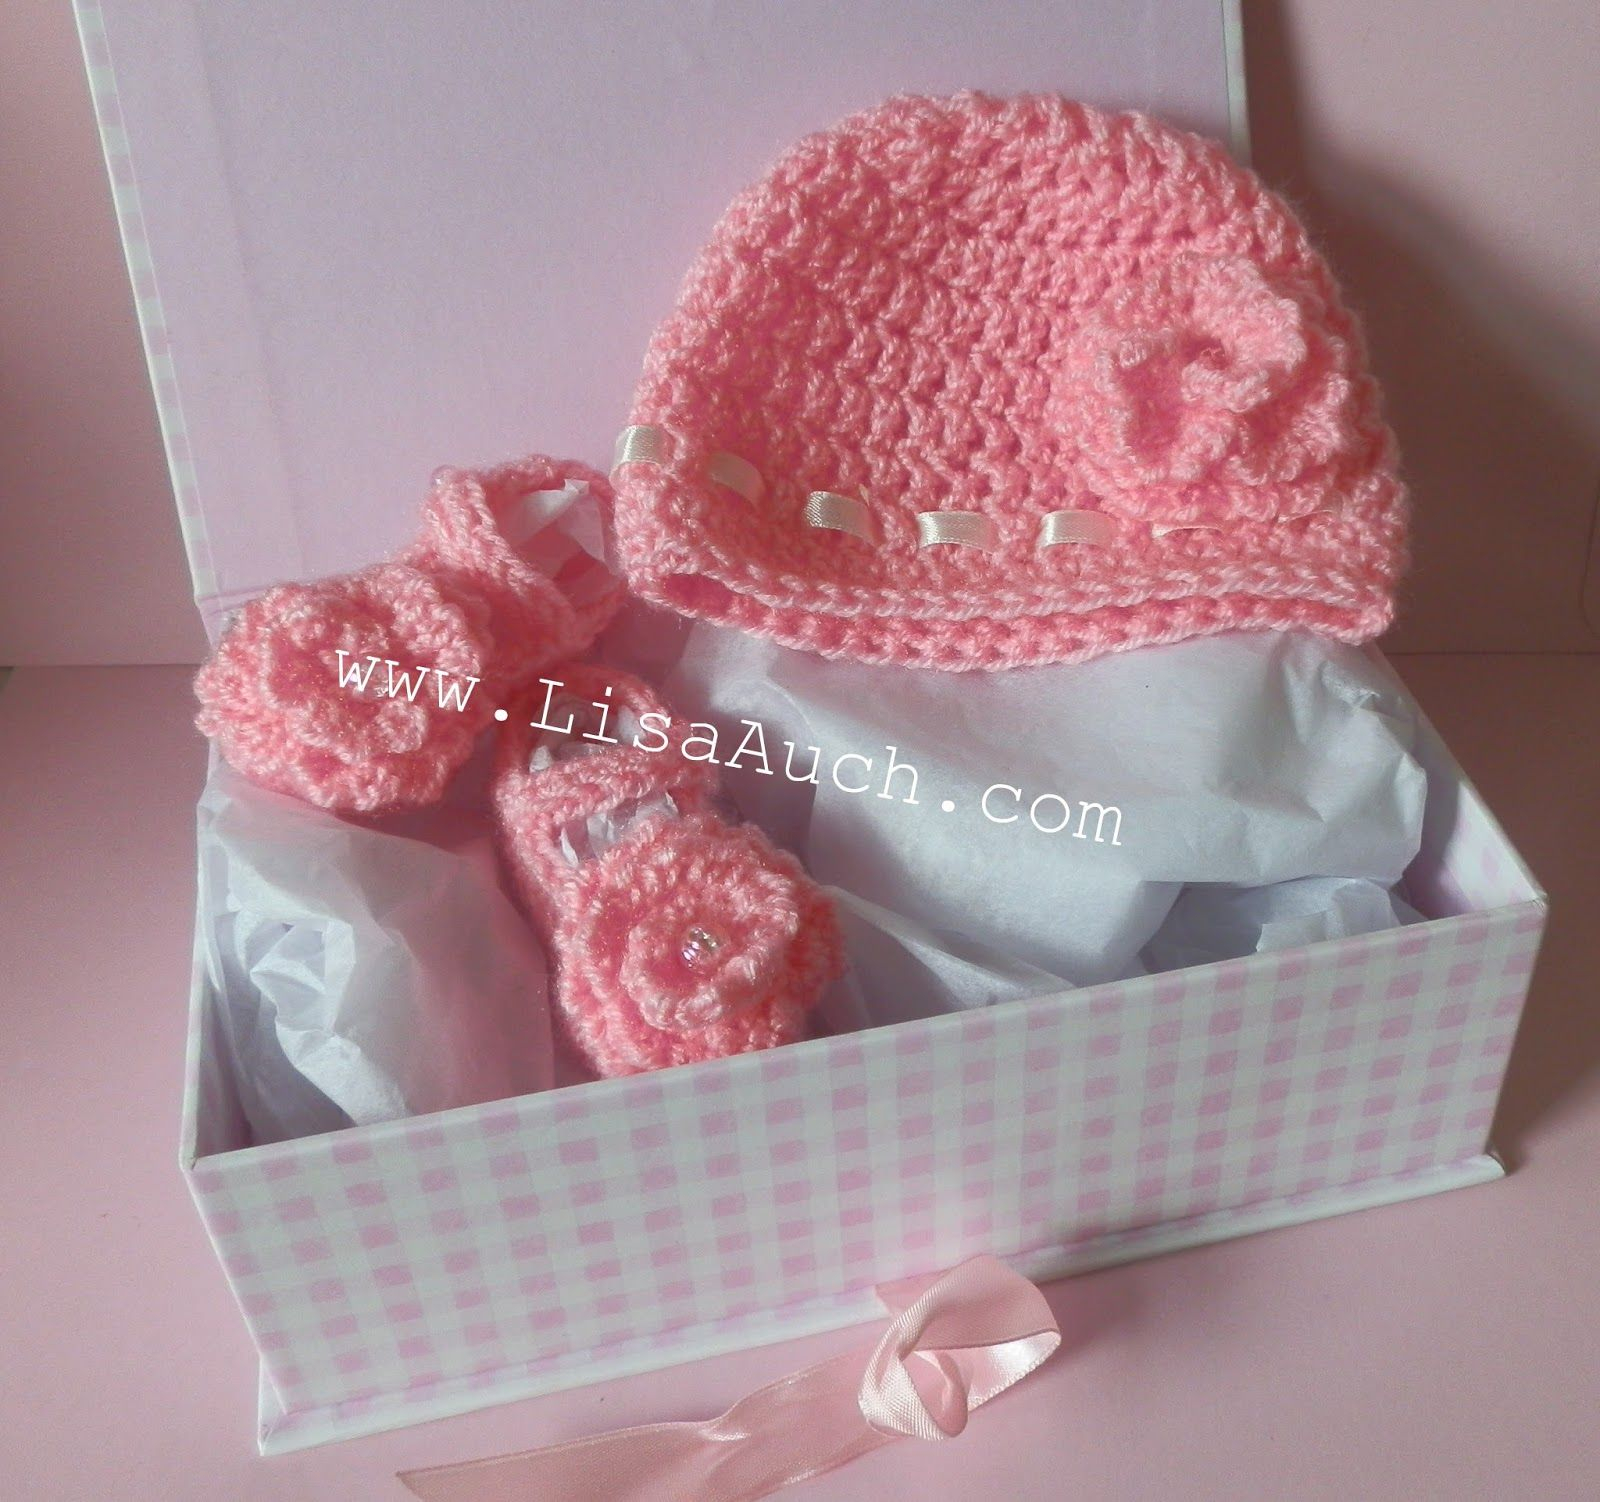 Crochet Patterns Baby Hats Free Crochet Patterns For Ba Hat And Ba Bootee Shoes Set